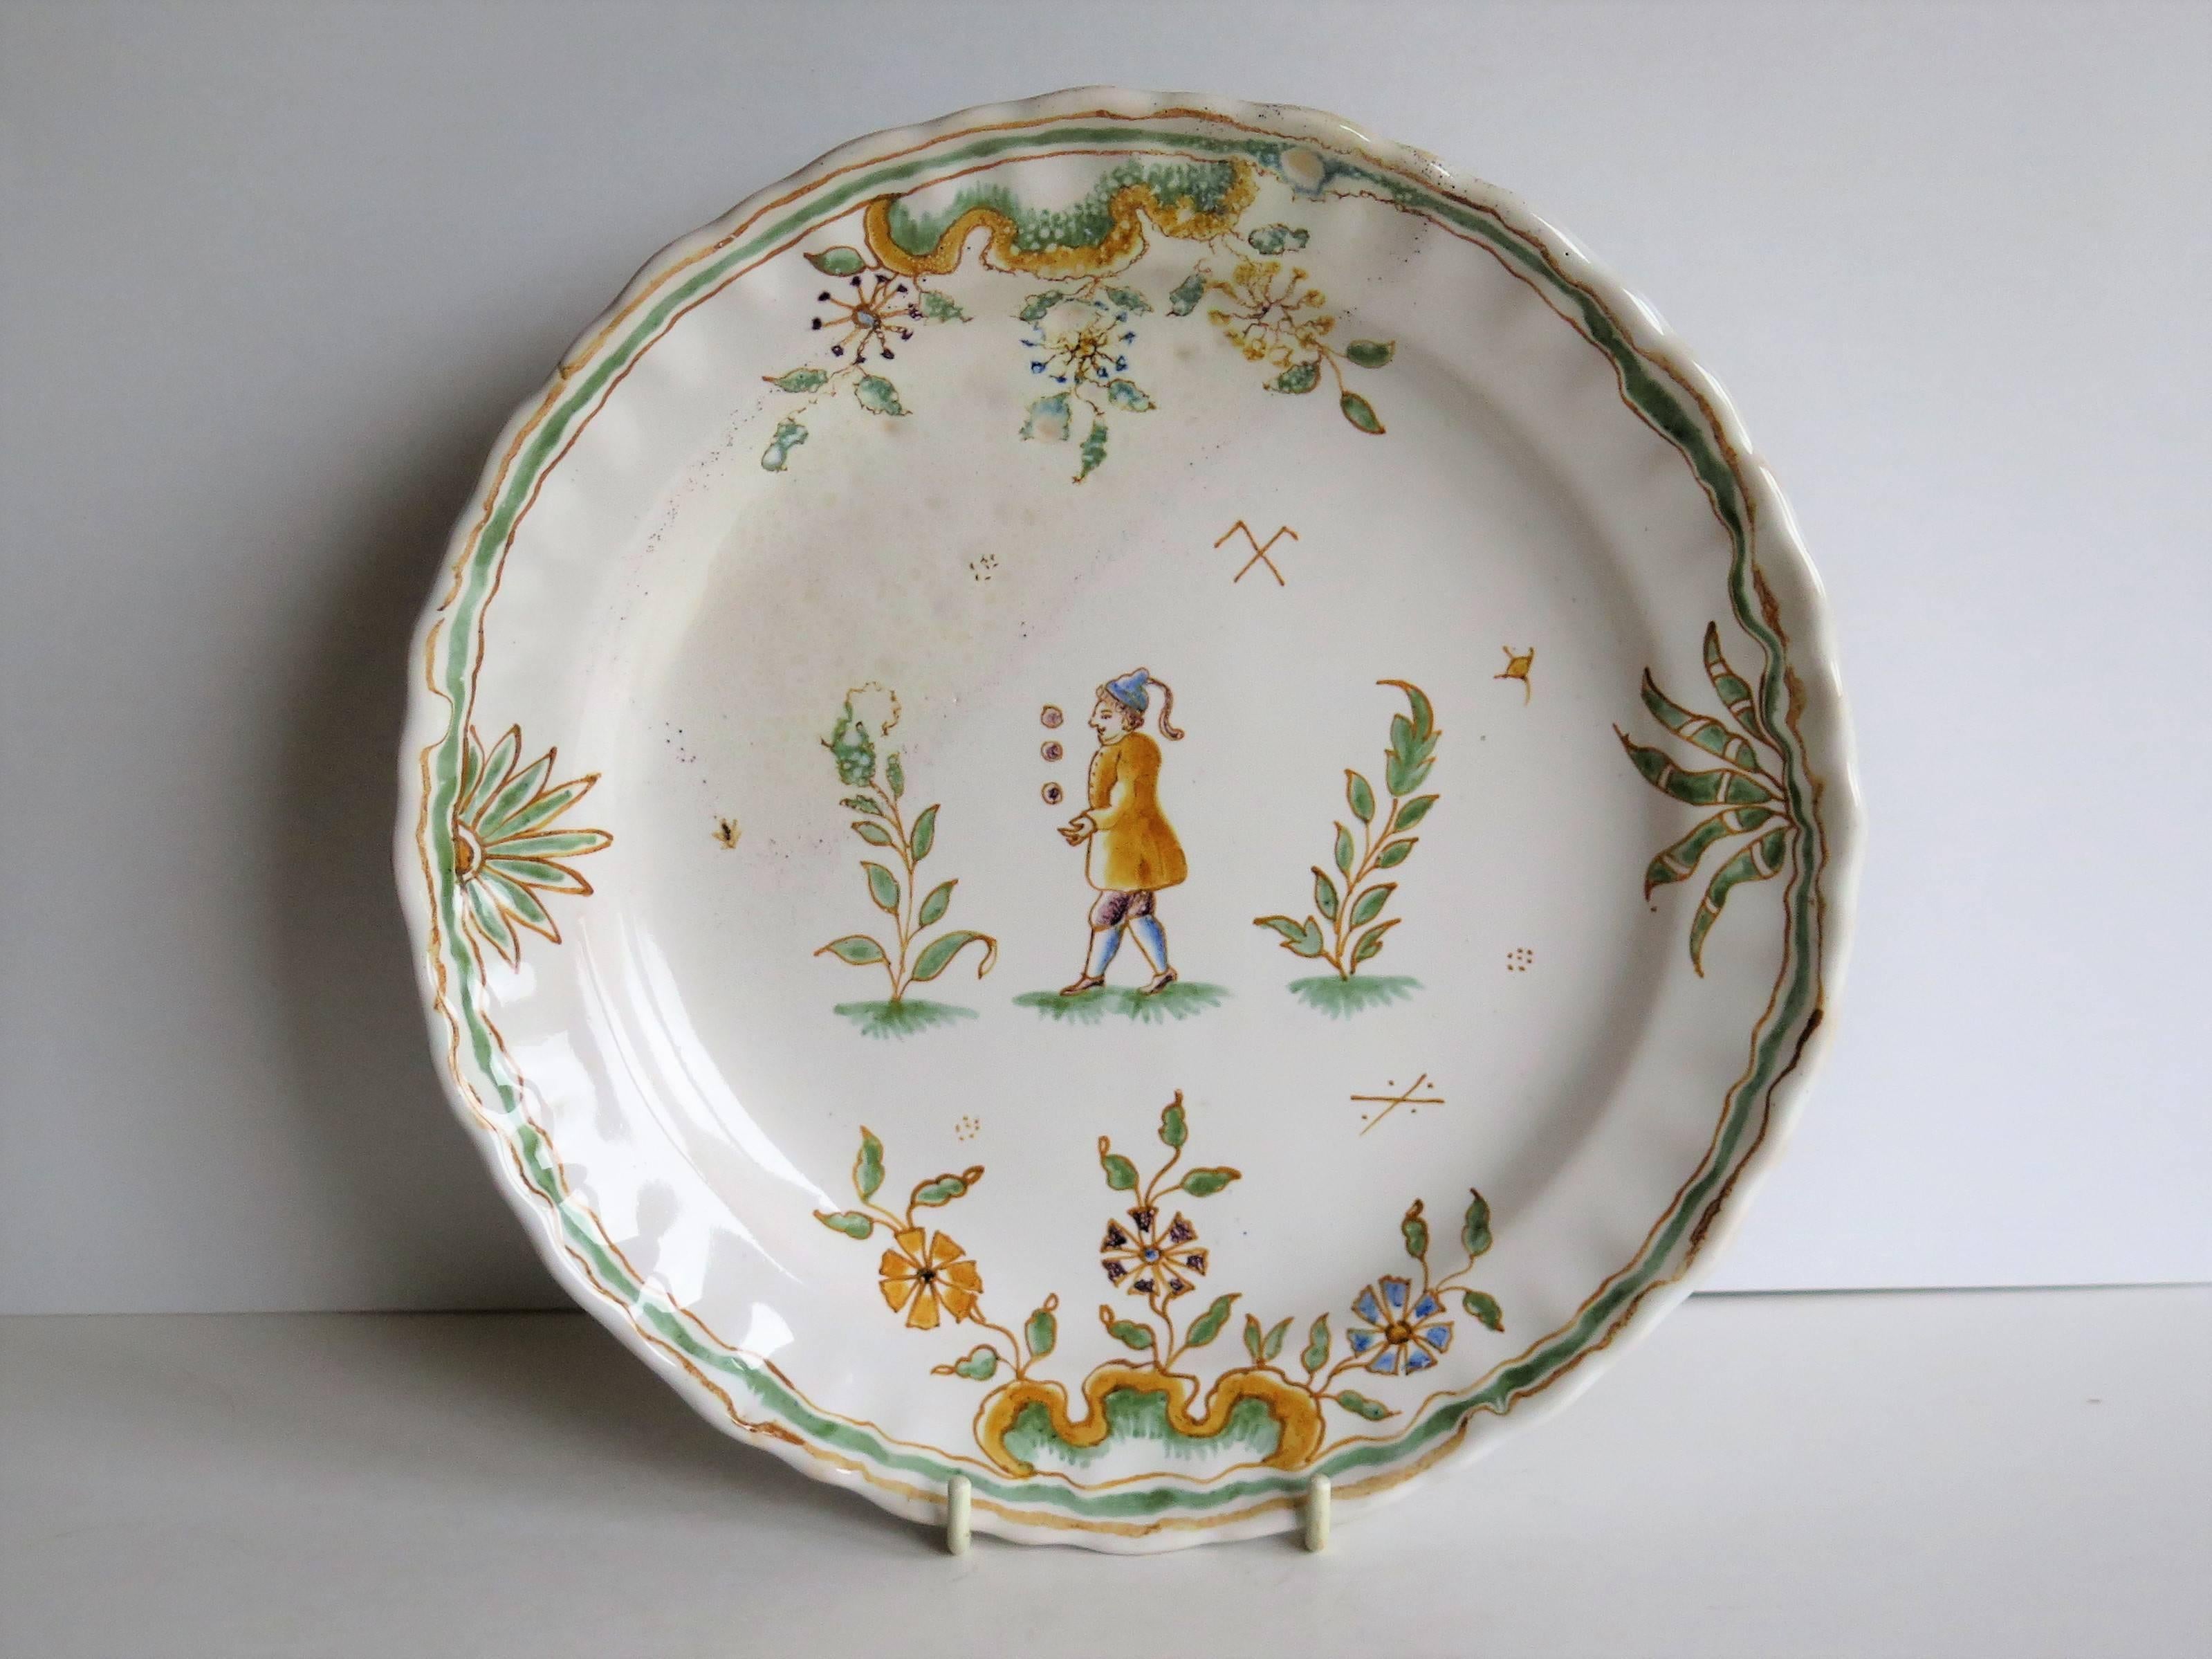 French Provincial Late 18th Century, Faience Dish or Plate, Hand-Painted Juggler, circa 1790